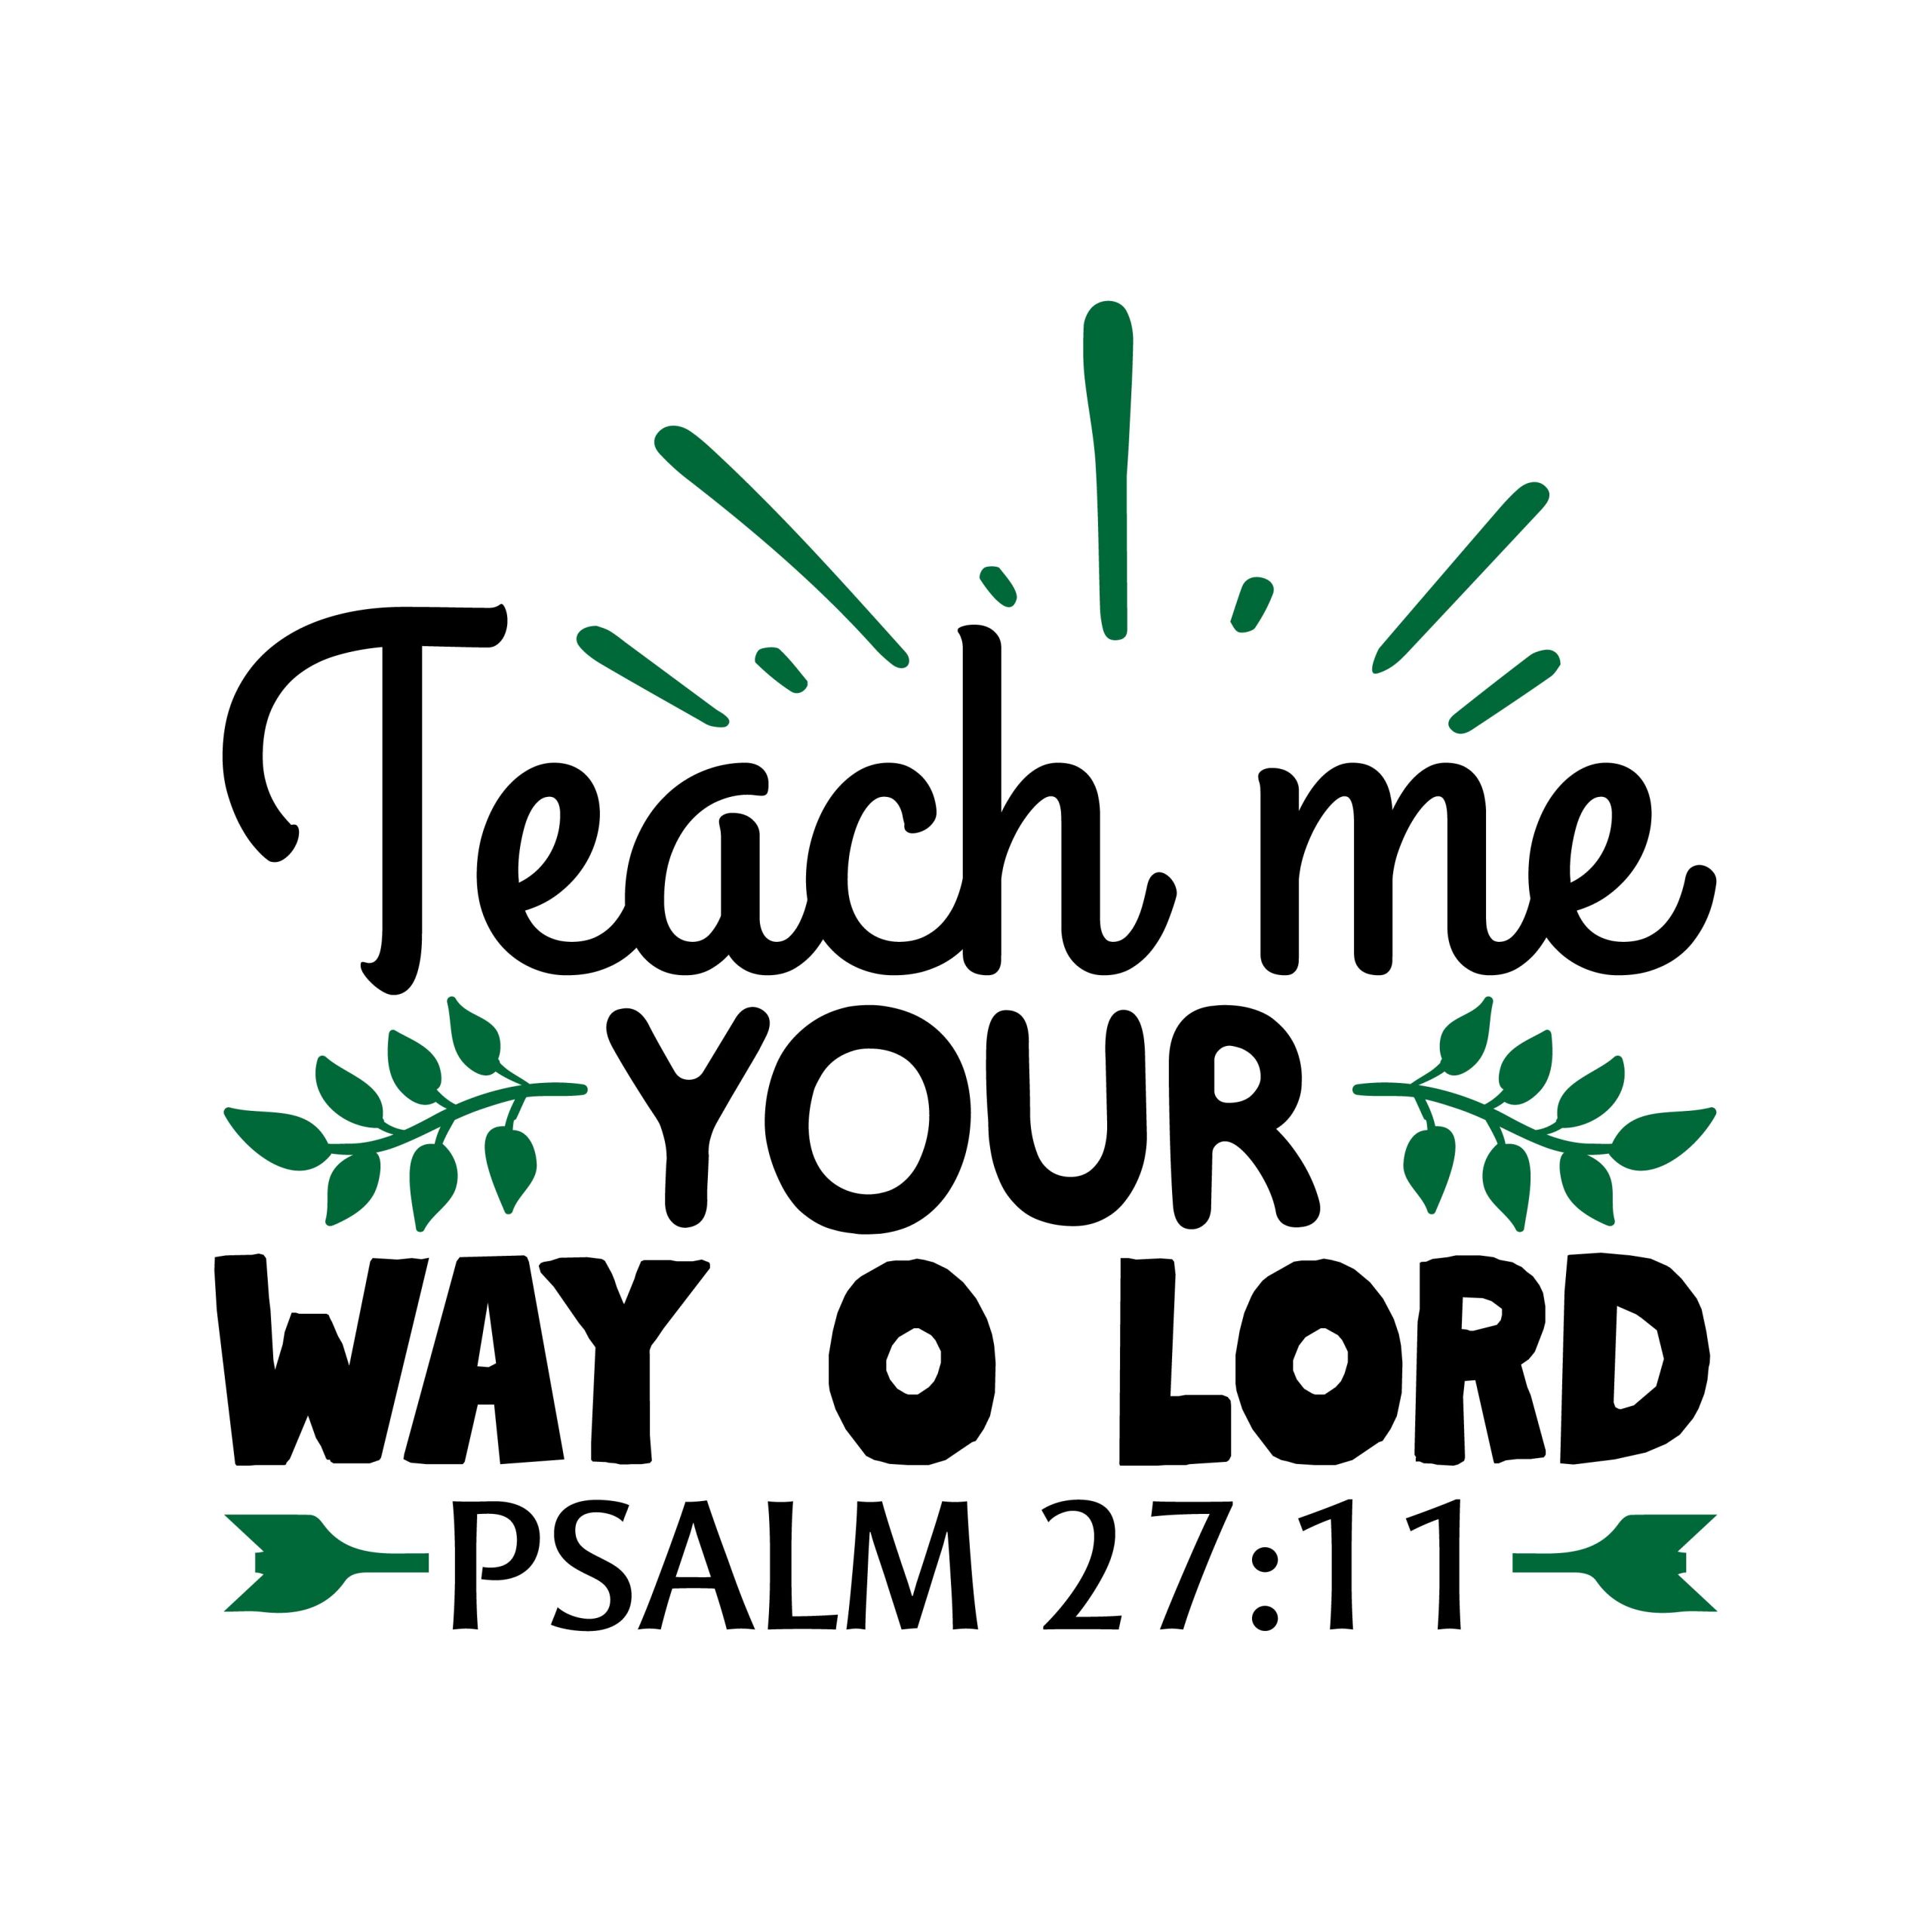 Teach me your way o lord Psalm 27:11, bible verses, scripture verses, svg files, passages, sayings, cricut designs, silhouette, embroidery, bundle, free cut files, design space, vector